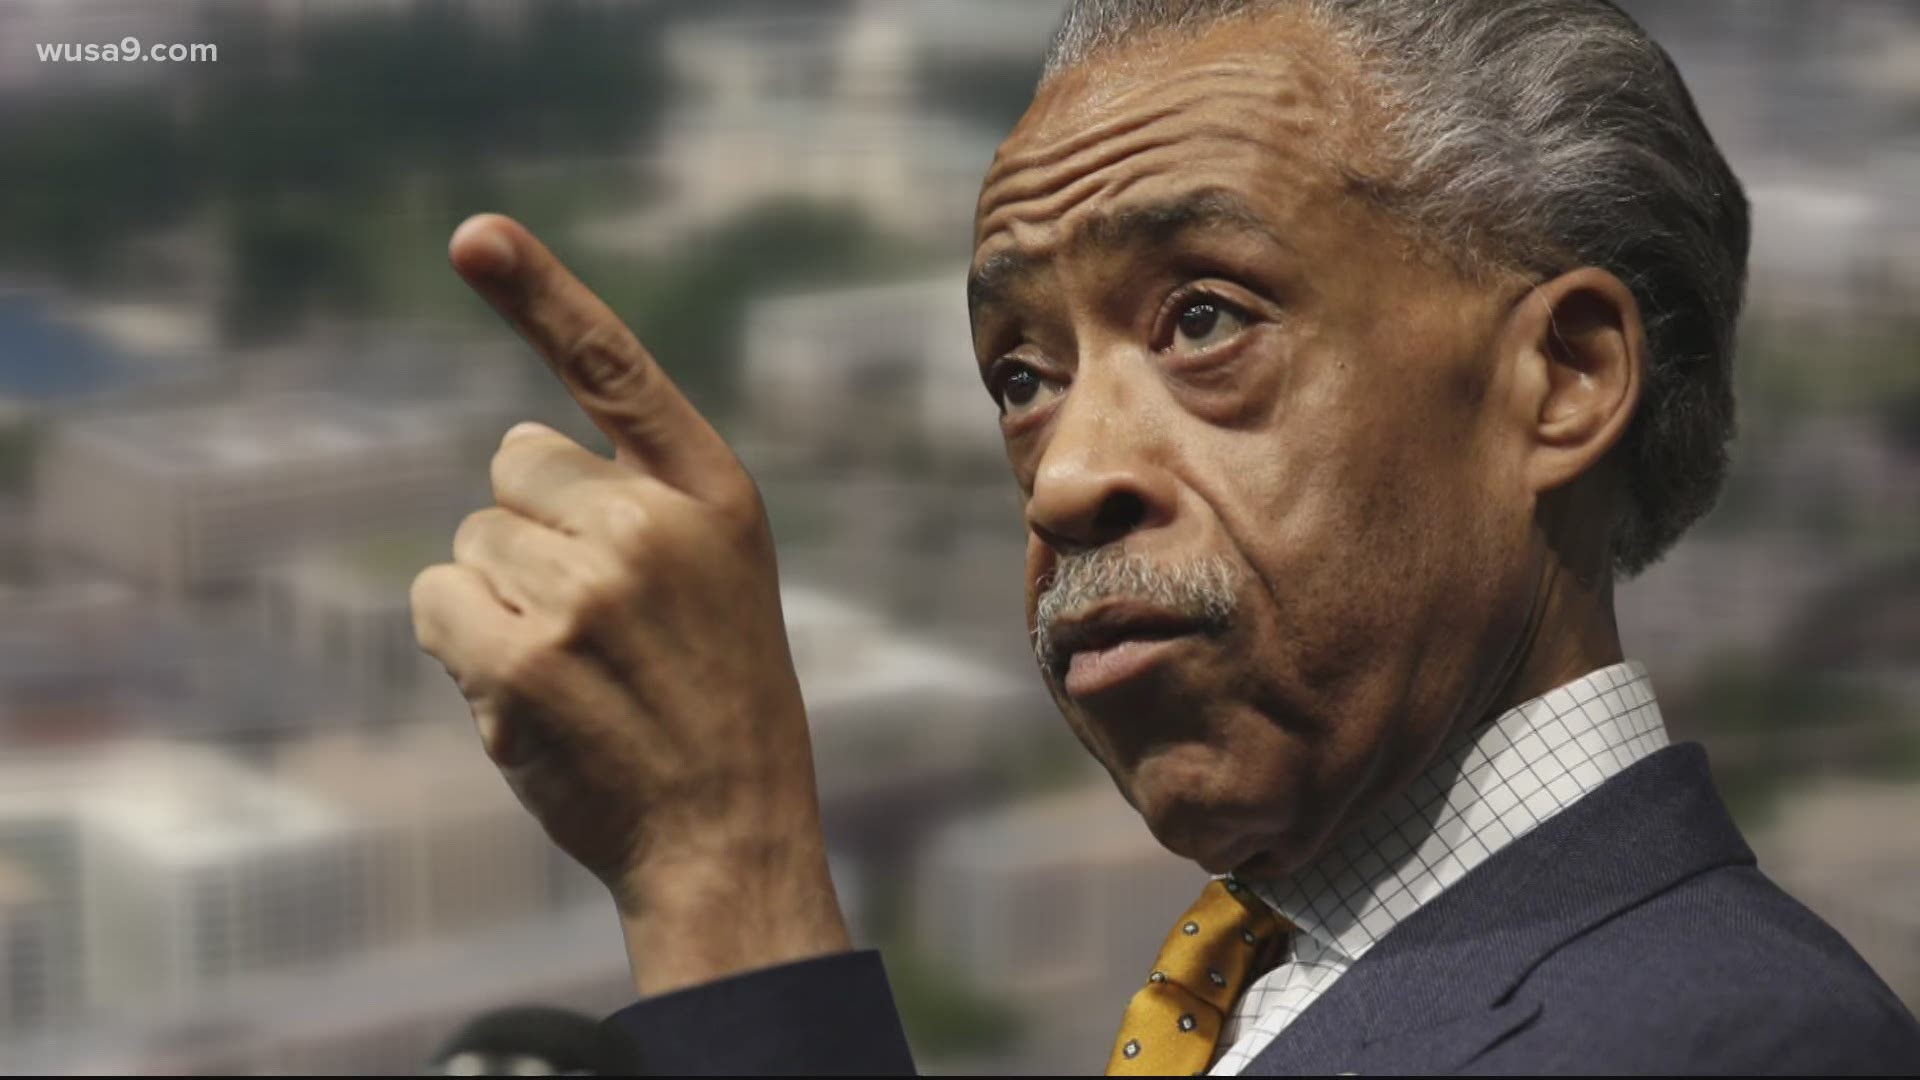 In his Final Thought, Bruce makes a plea to Al Sharpton to reconsider the March on Washington in August, as we are still in midst of the coronavirus pandemic.